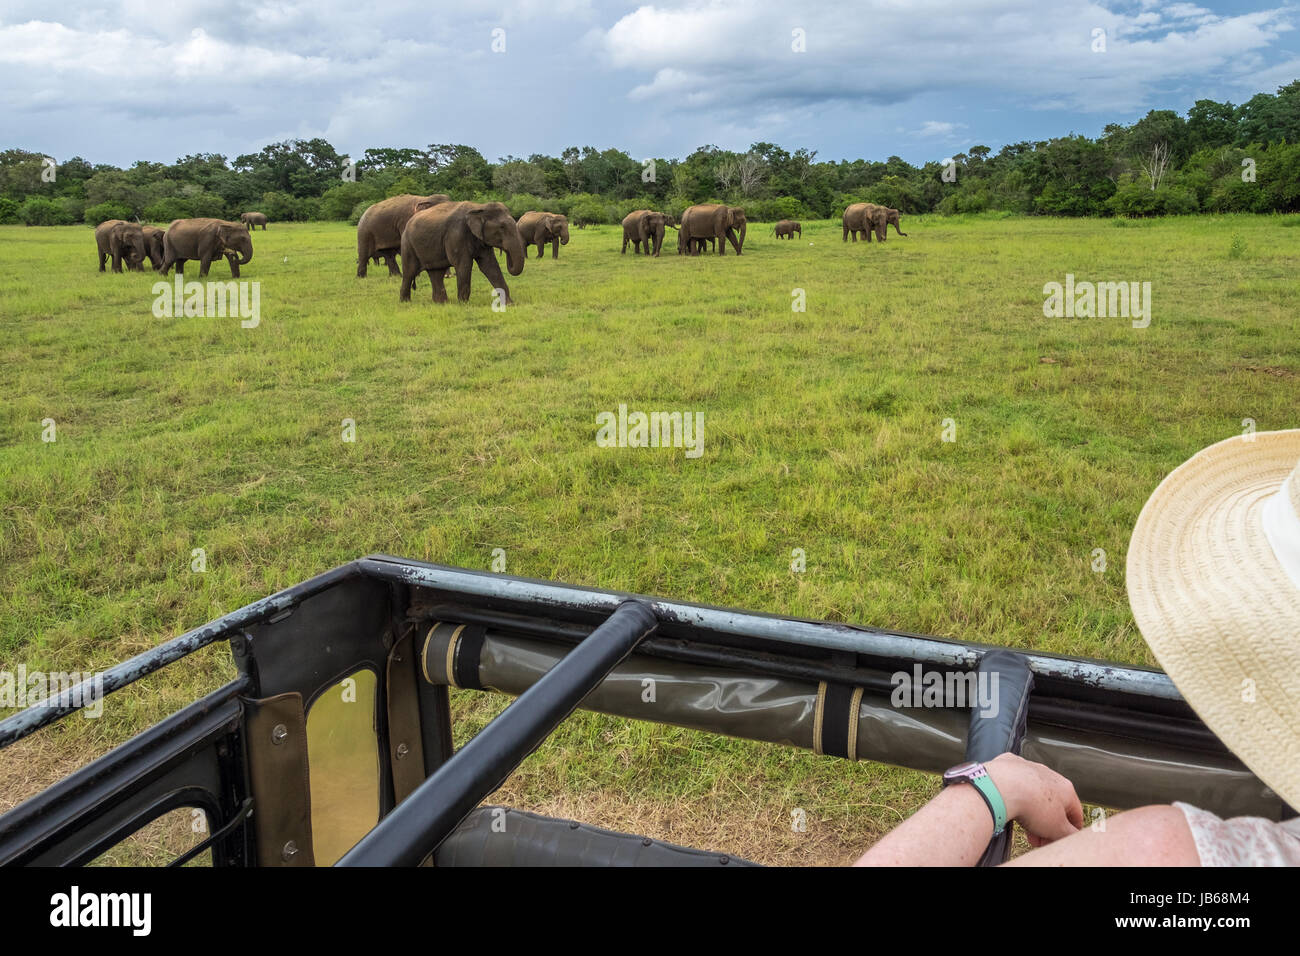 A woman watches elephants in the Minneriya National Park, Sri Lanka from a jeep Stock Photo